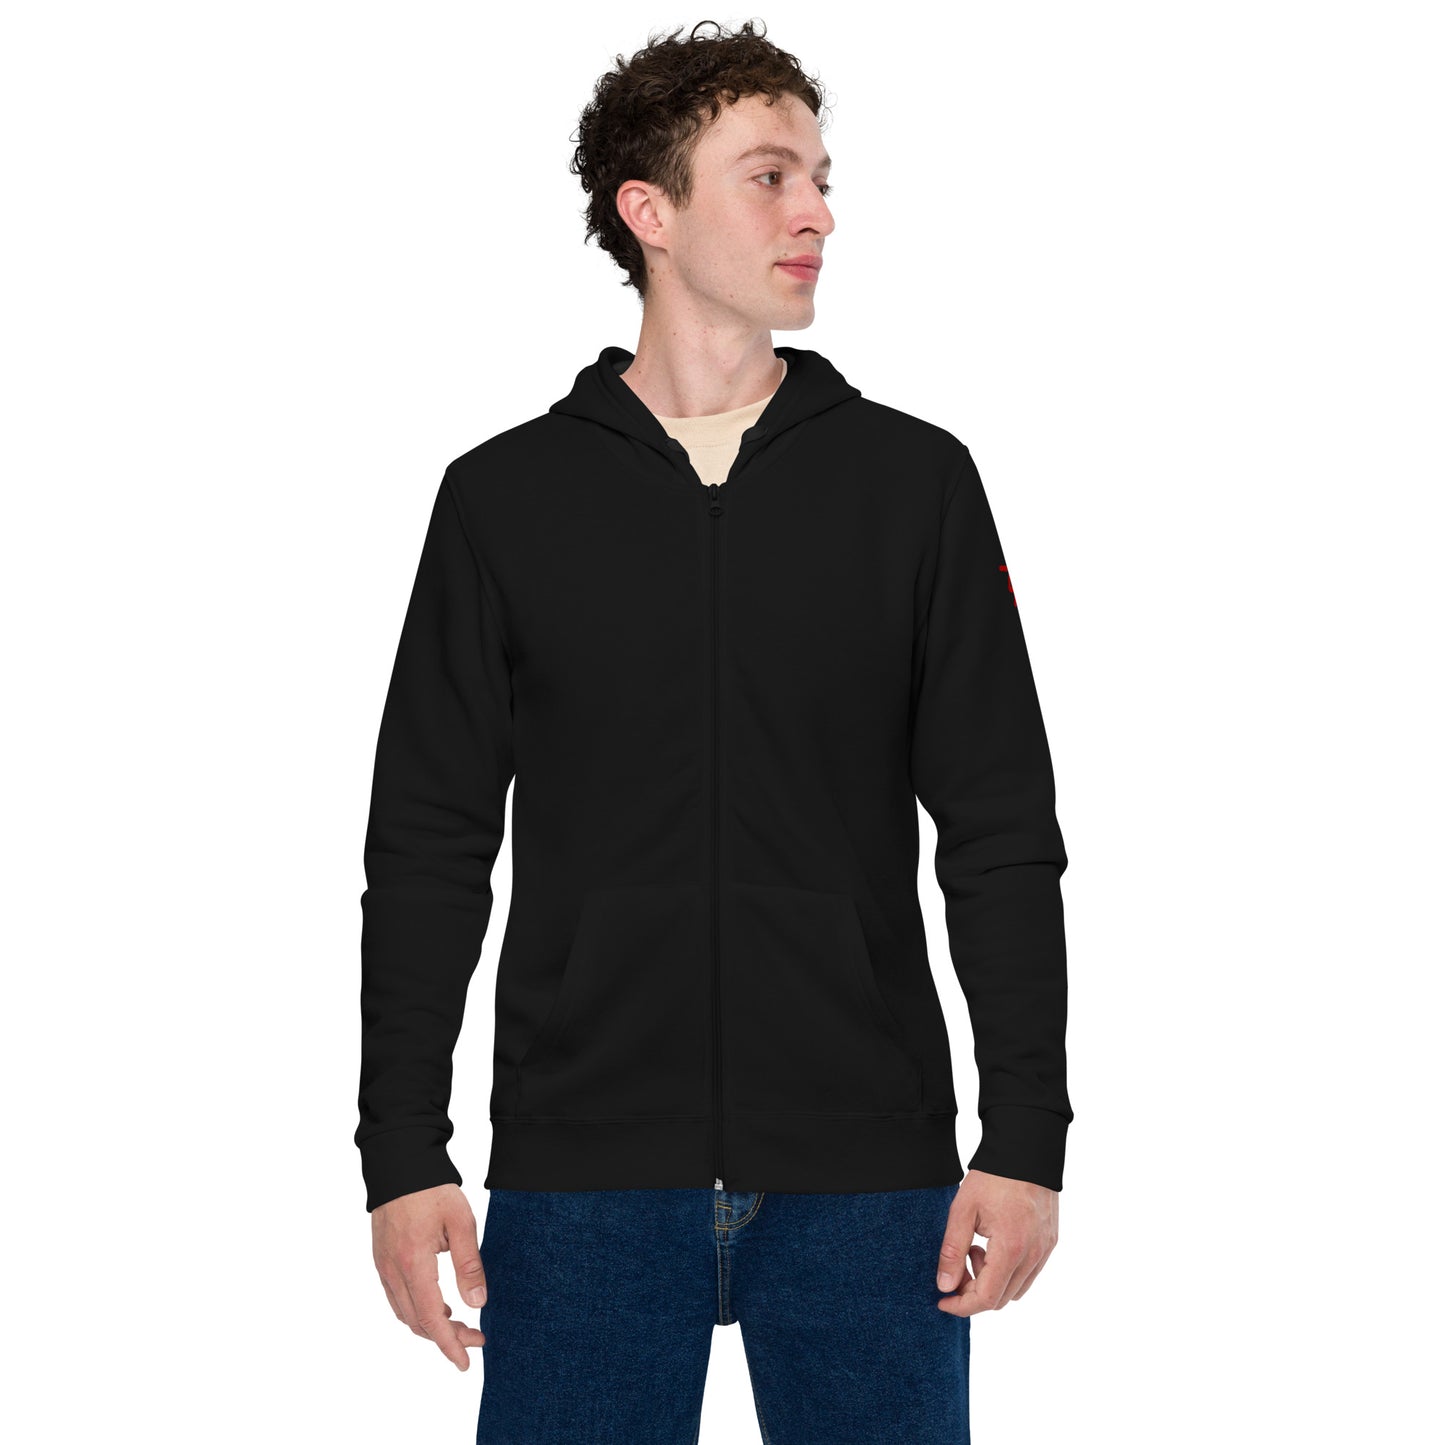 Chinese quince Unisex basic zip hoodie